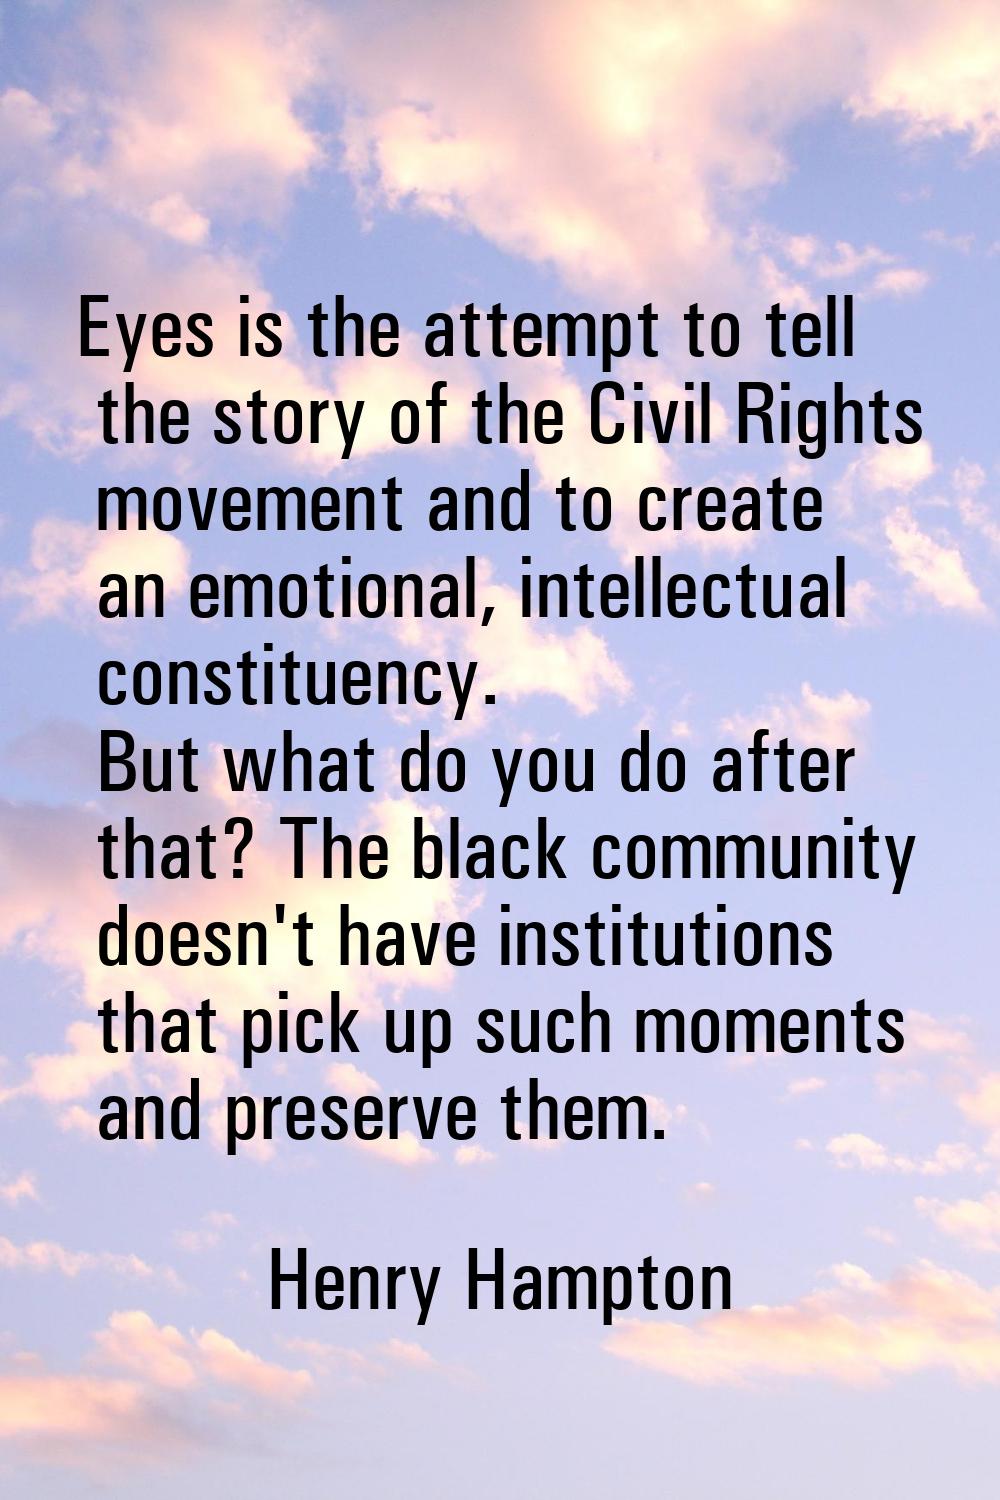 Eyes is the attempt to tell the story of the Civil Rights movement and to create an emotional, inte